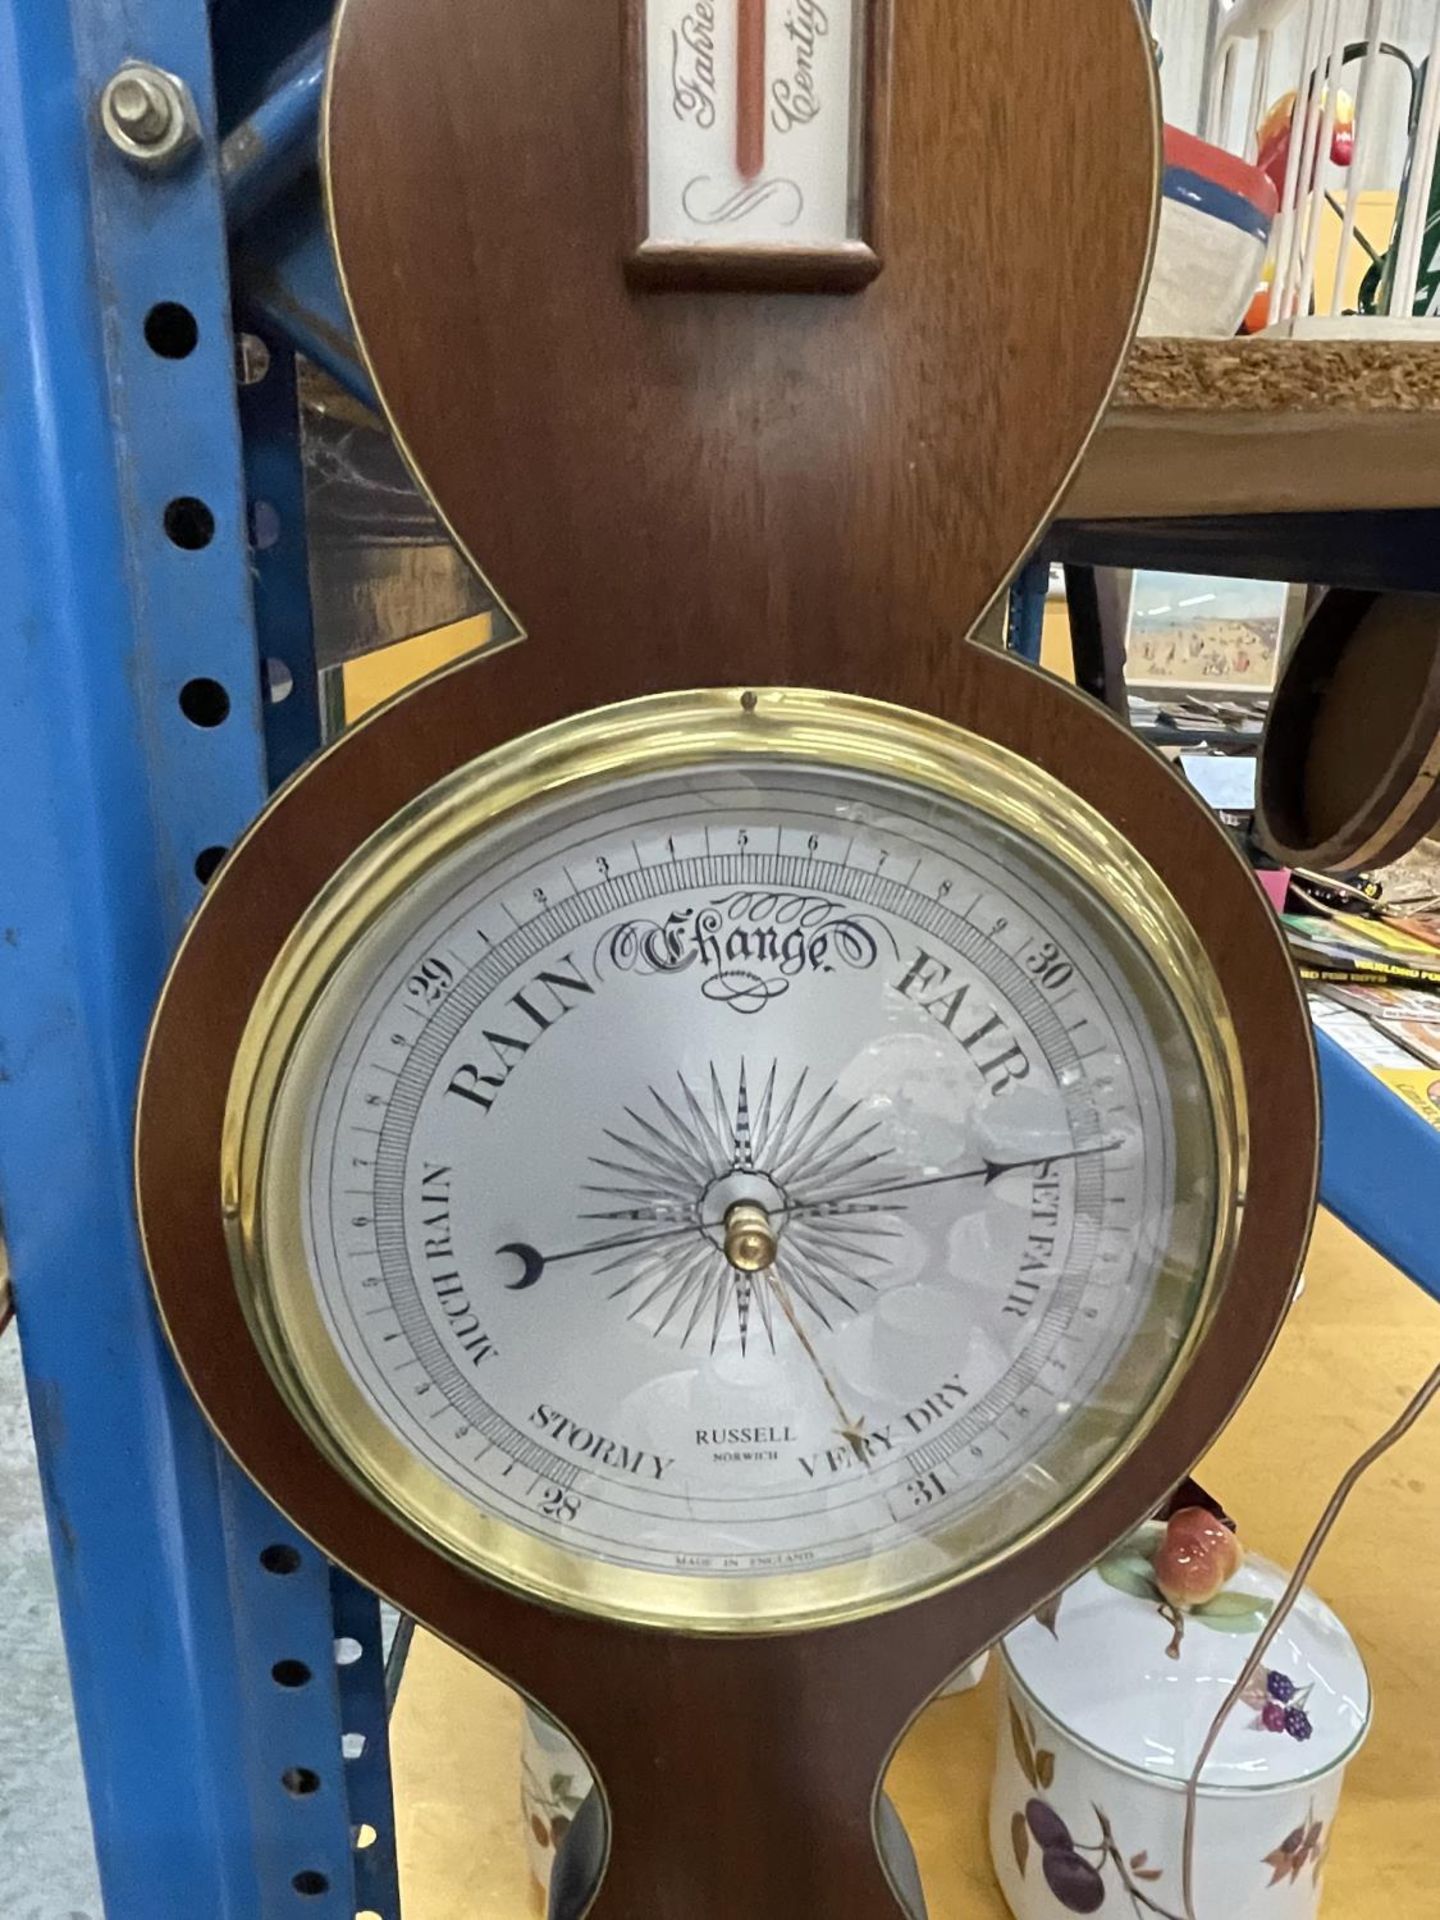 A RUSSELL NORWICH MAHOGANY CASED BAROMETER IN AS NEW CONDITION WITH BRASS FIXINGS AND DIAL - Image 3 of 4